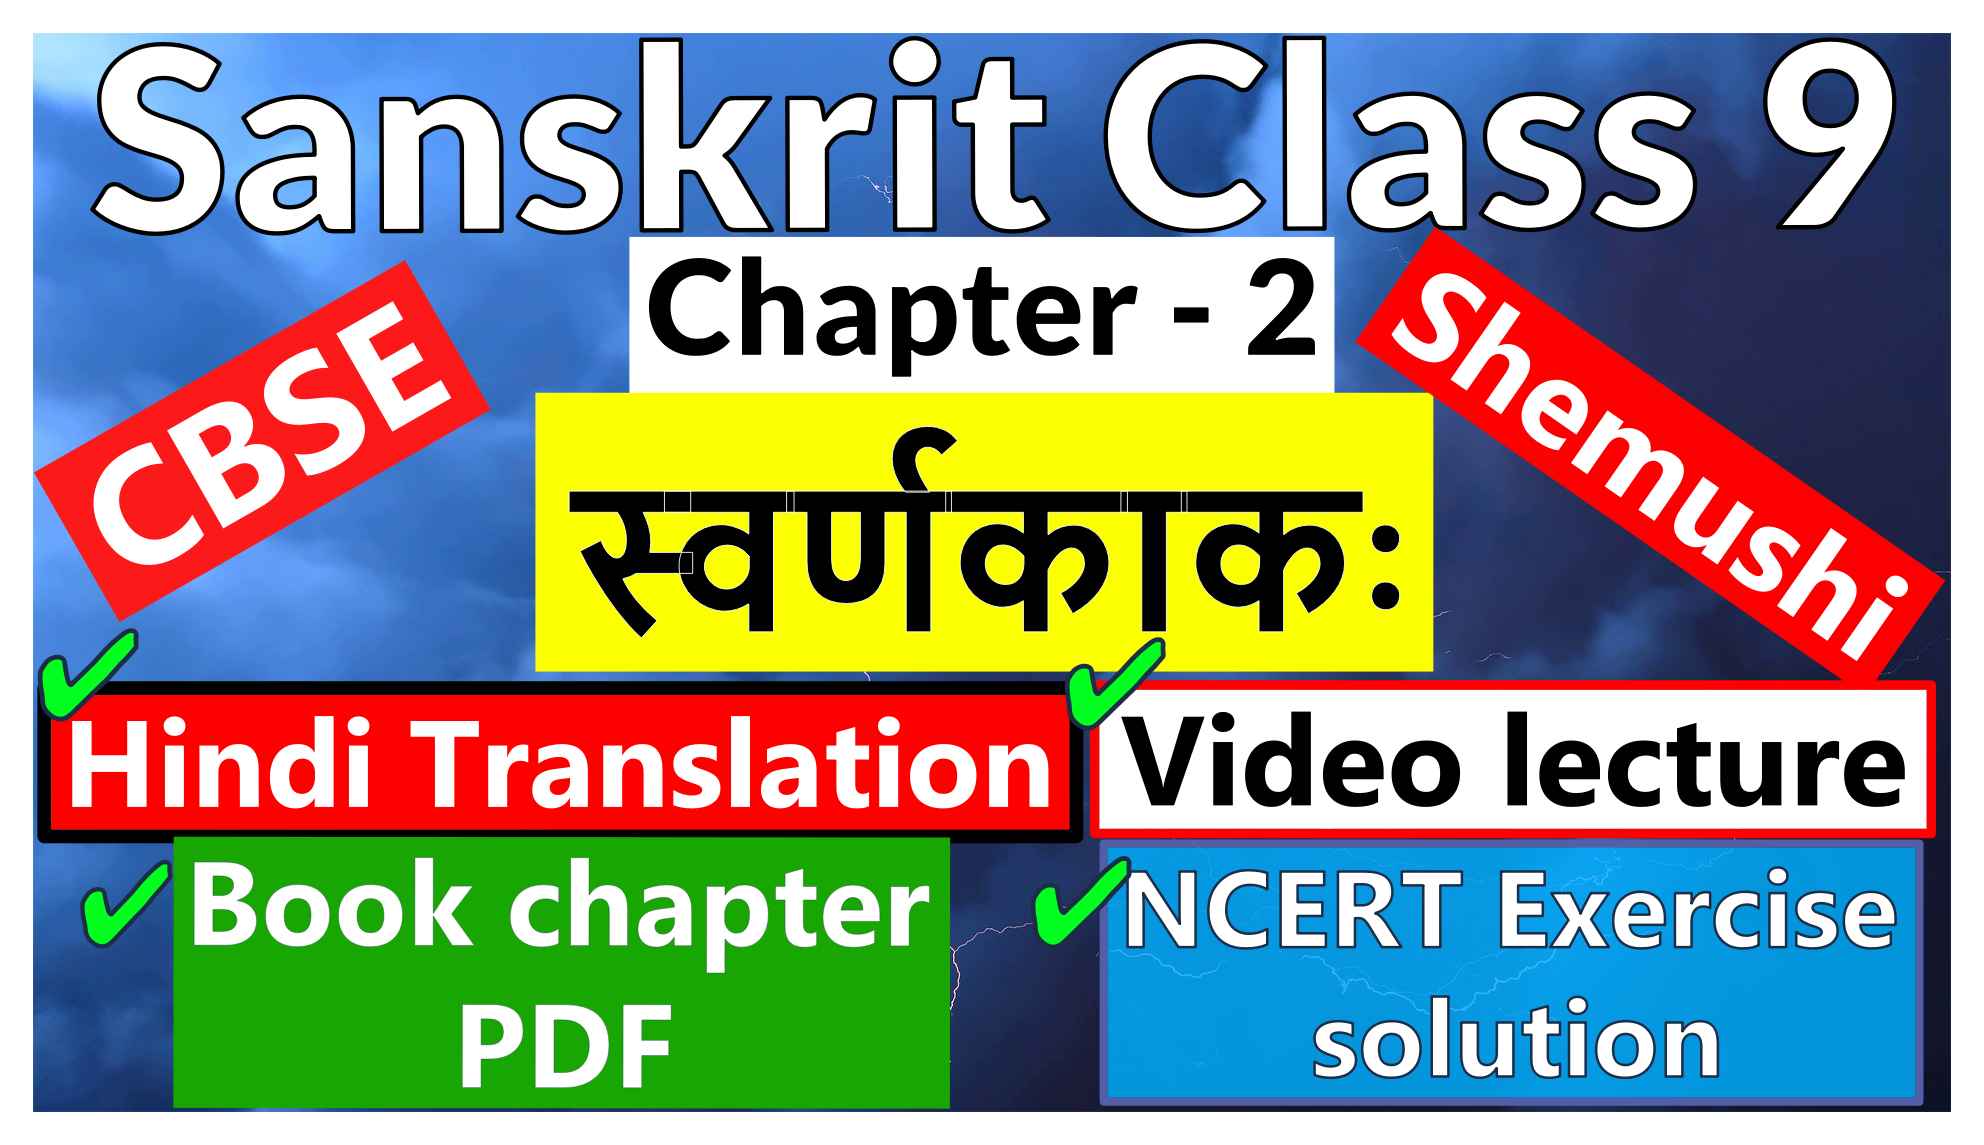 Sanskrit Class 9- Chapter 2 - स्वर्णकाकः- Hindi Translation, Video lecture, NCERT Exercise solution (Question-Answer), Book chapter PDF